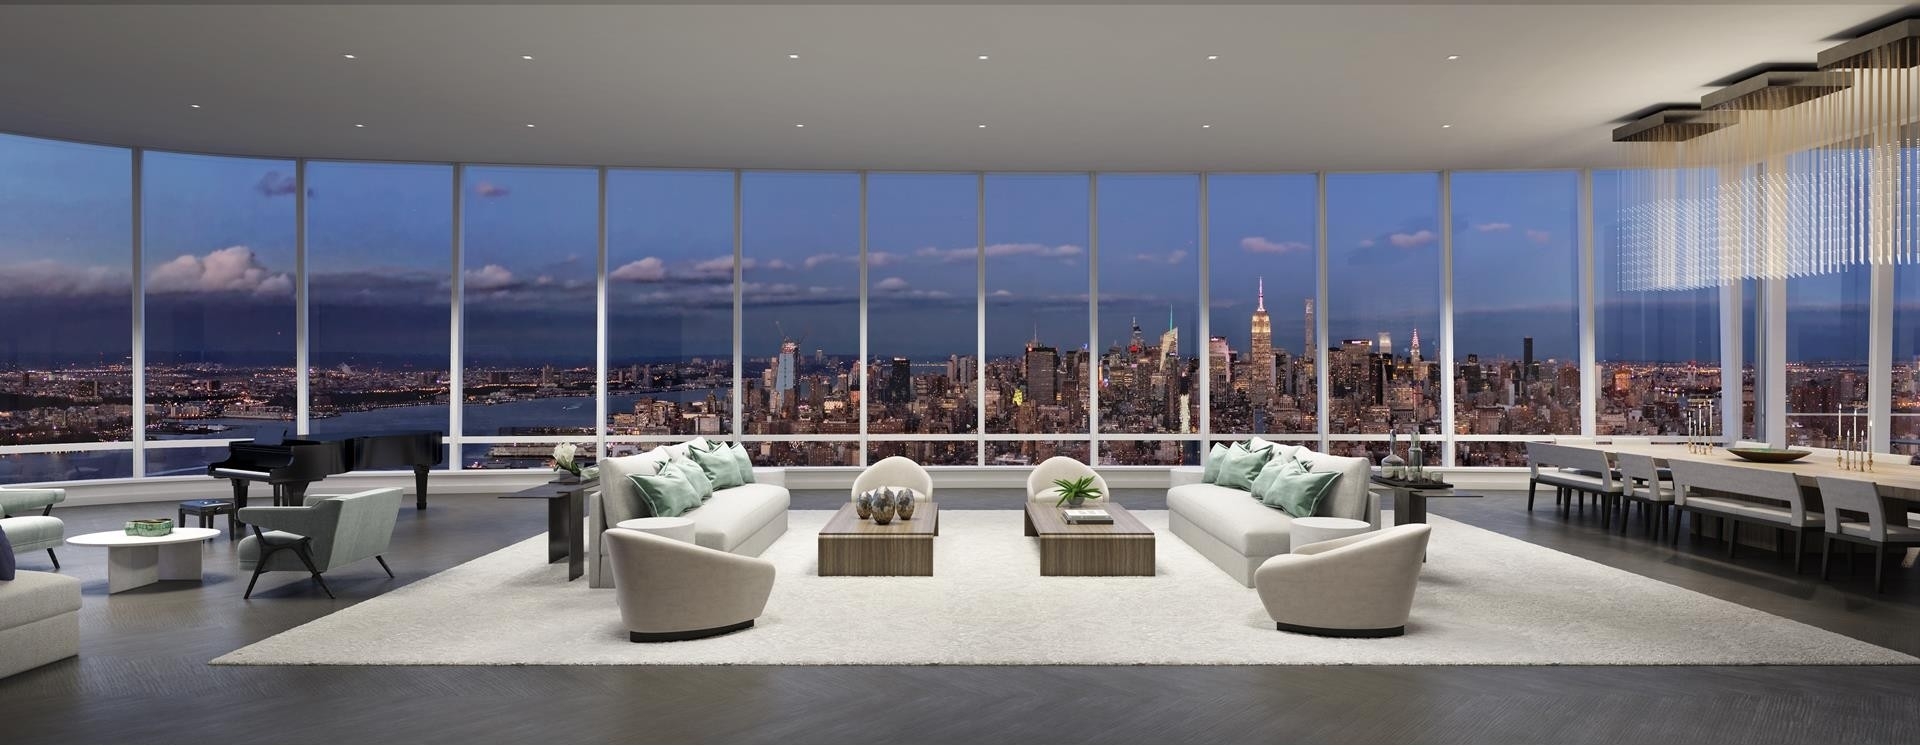 2. Condominiums for Sale at One Eleven Murray Street, 111 MURRAY ST, PH2 TriBeCa, New York, New York 10007